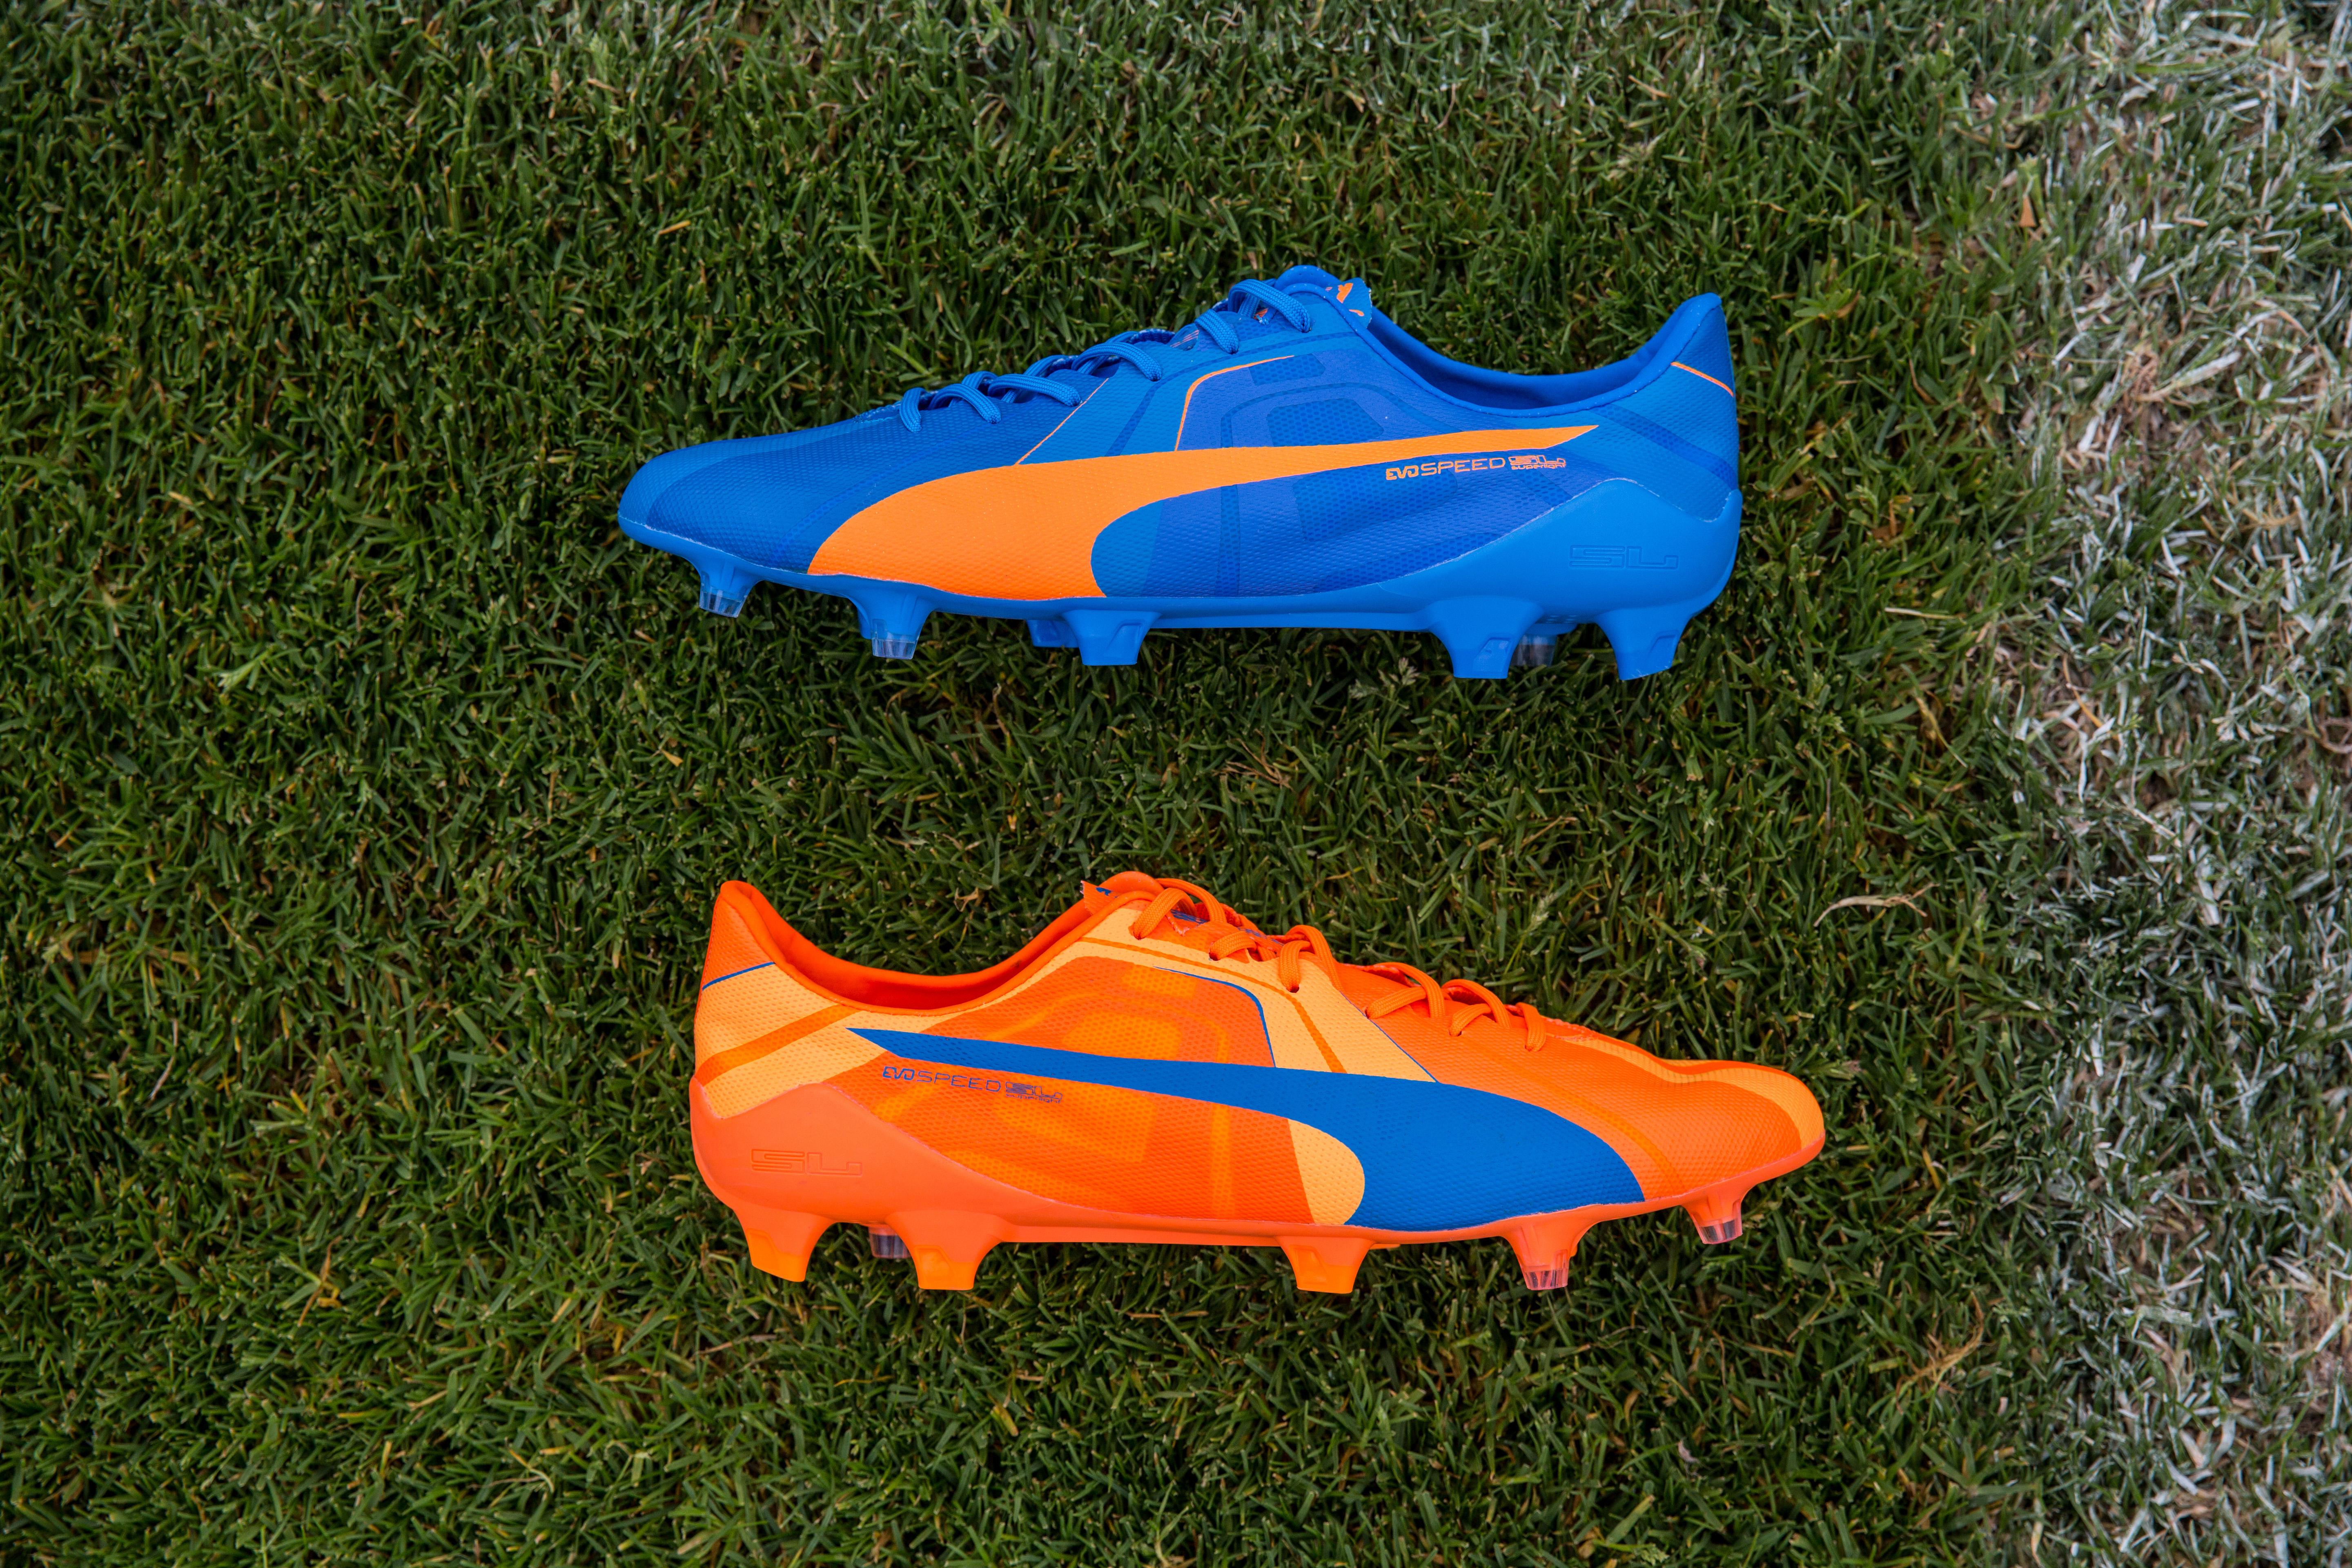 PUMA Launched the new H2H Duality evoSPEED Football Boots in Orange and Blue